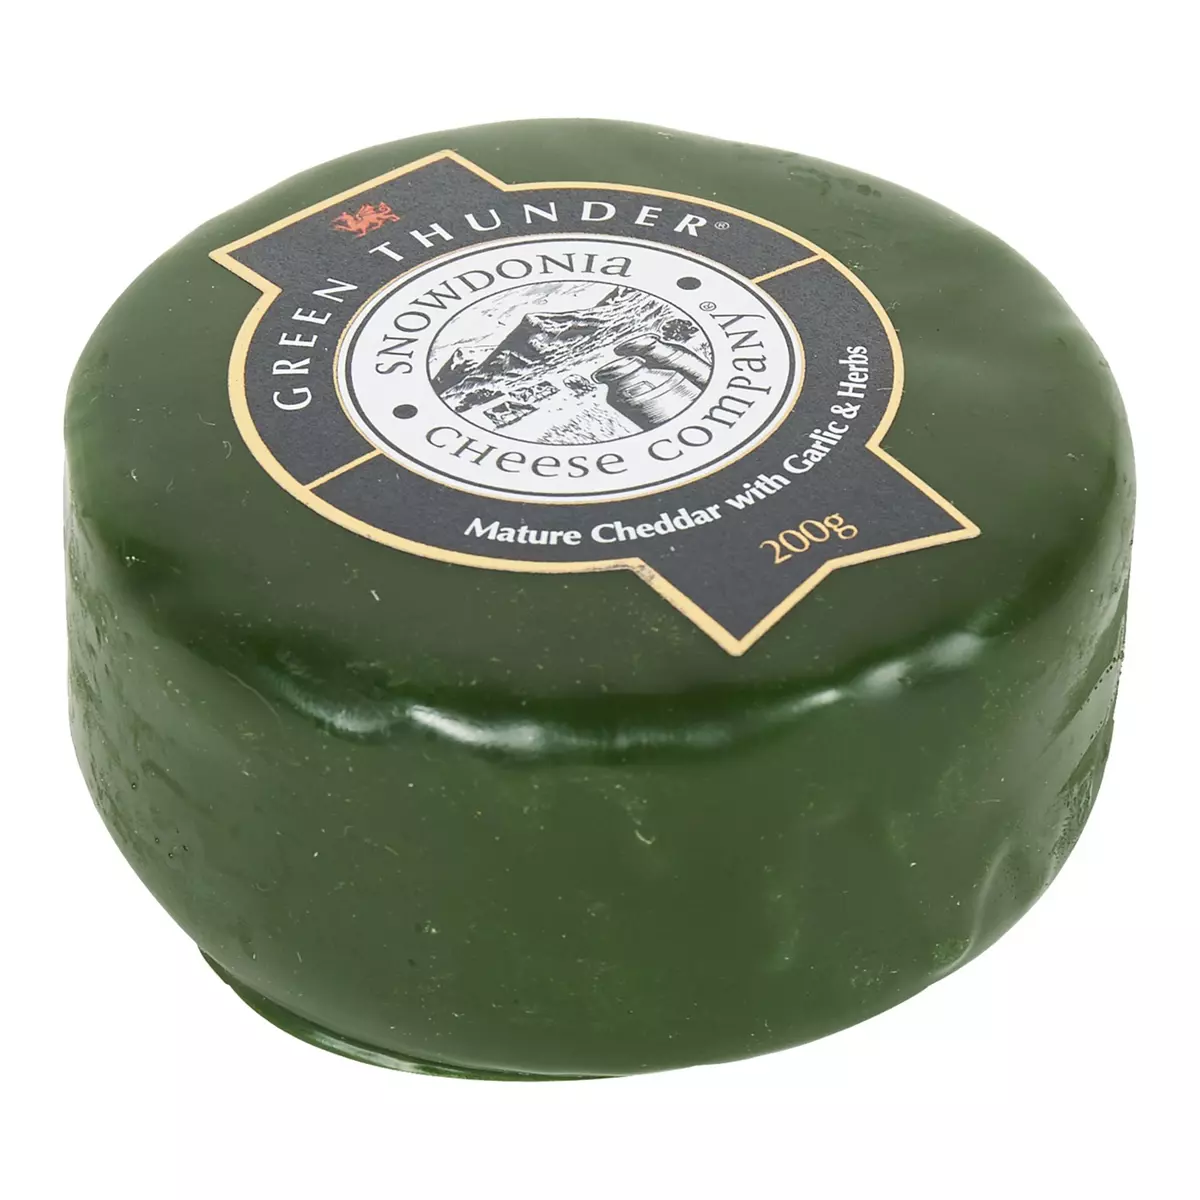 SNOWDONIA CHEESE Cheddar mature ail et fines herbes 200g